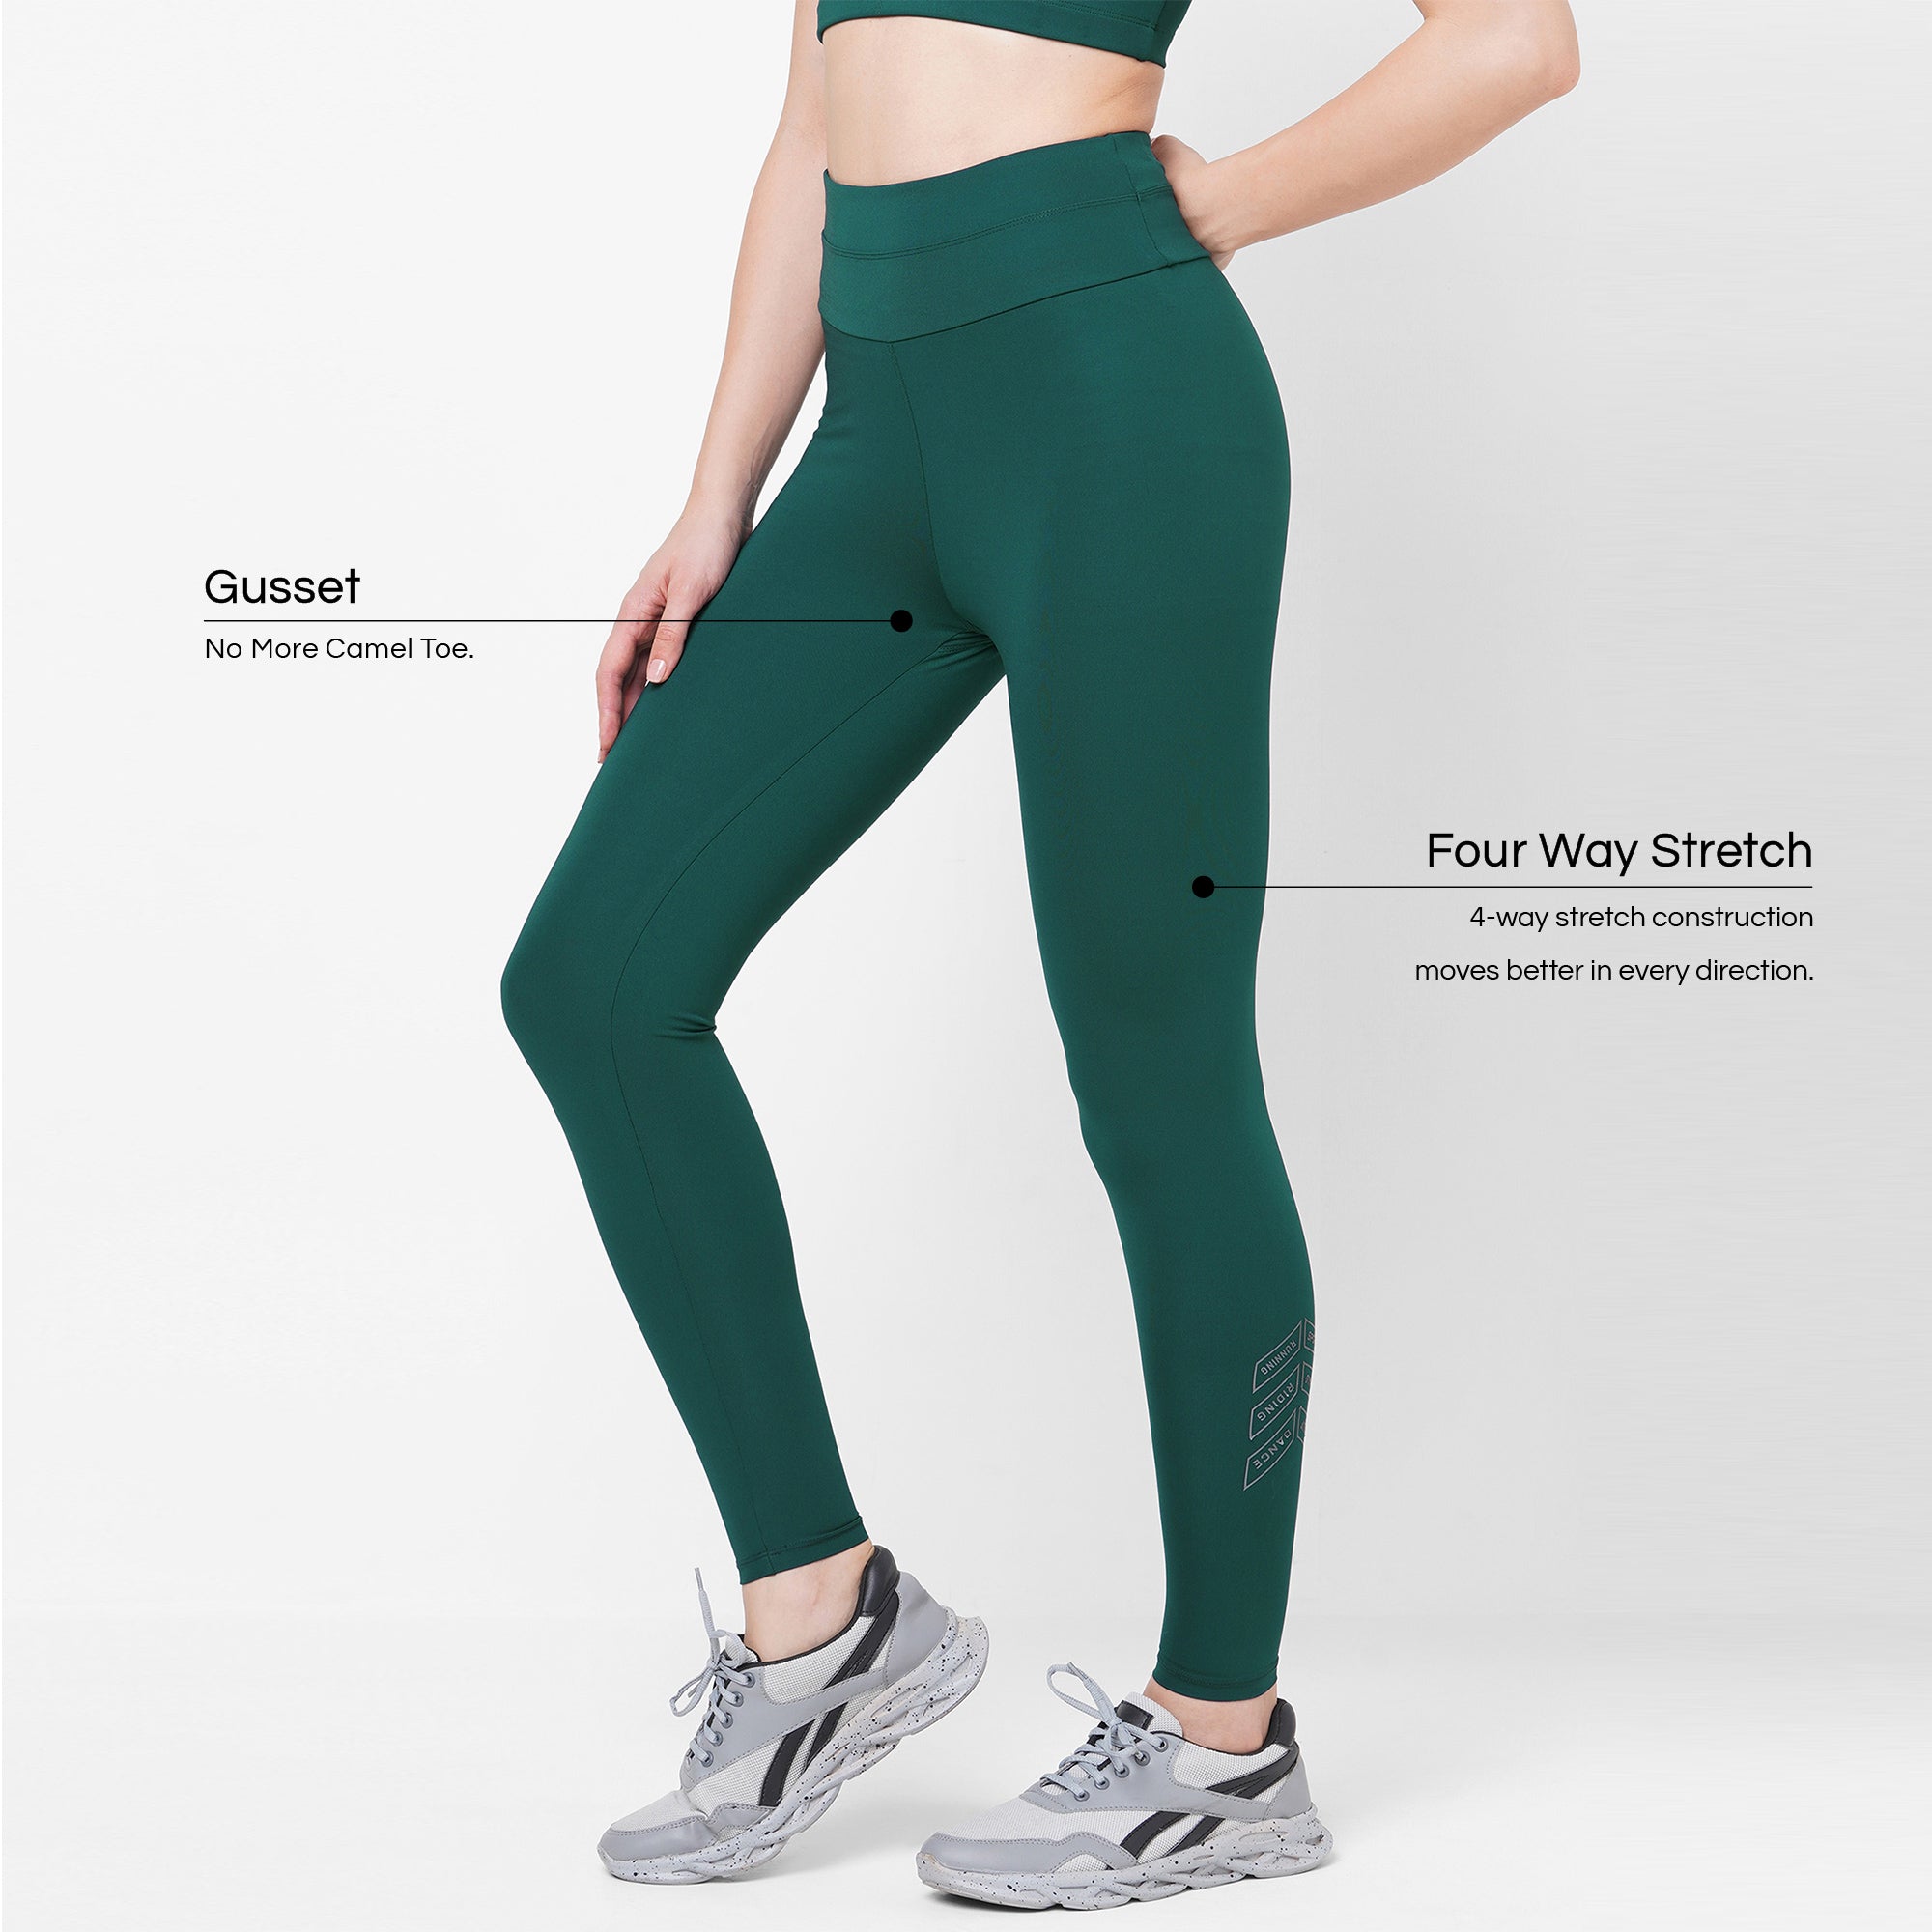 Workout Legging - Sea Green and Grey Fairy